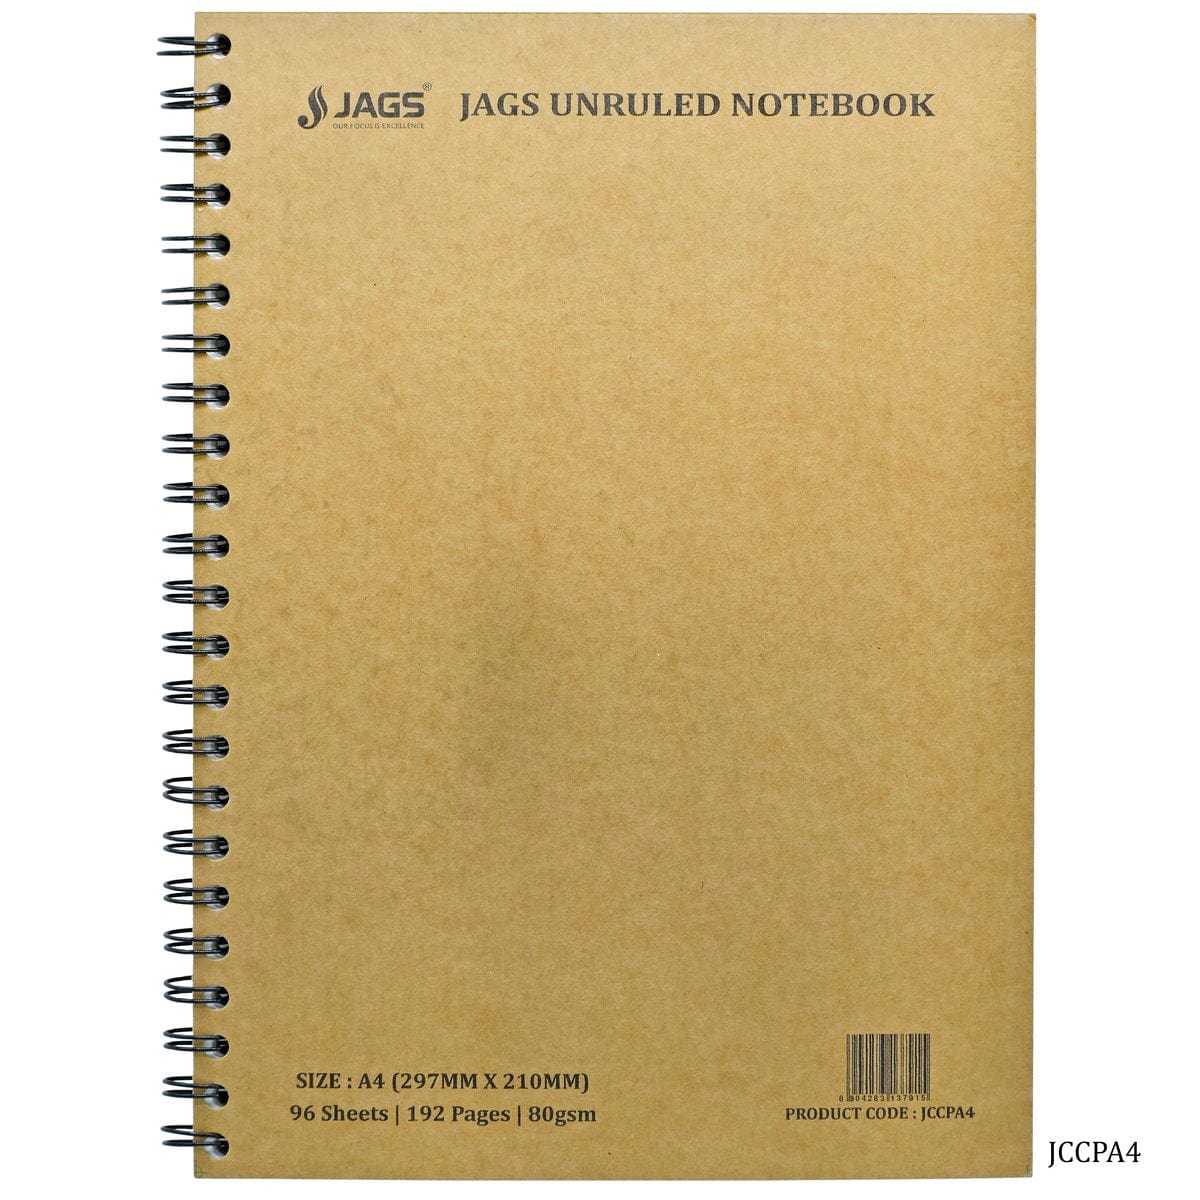 jags-mumbai Notebooks & Diaries Jags Unruled Notebook Wiro 192Sheet 96Pages 80Gsm A4 JCCPA4